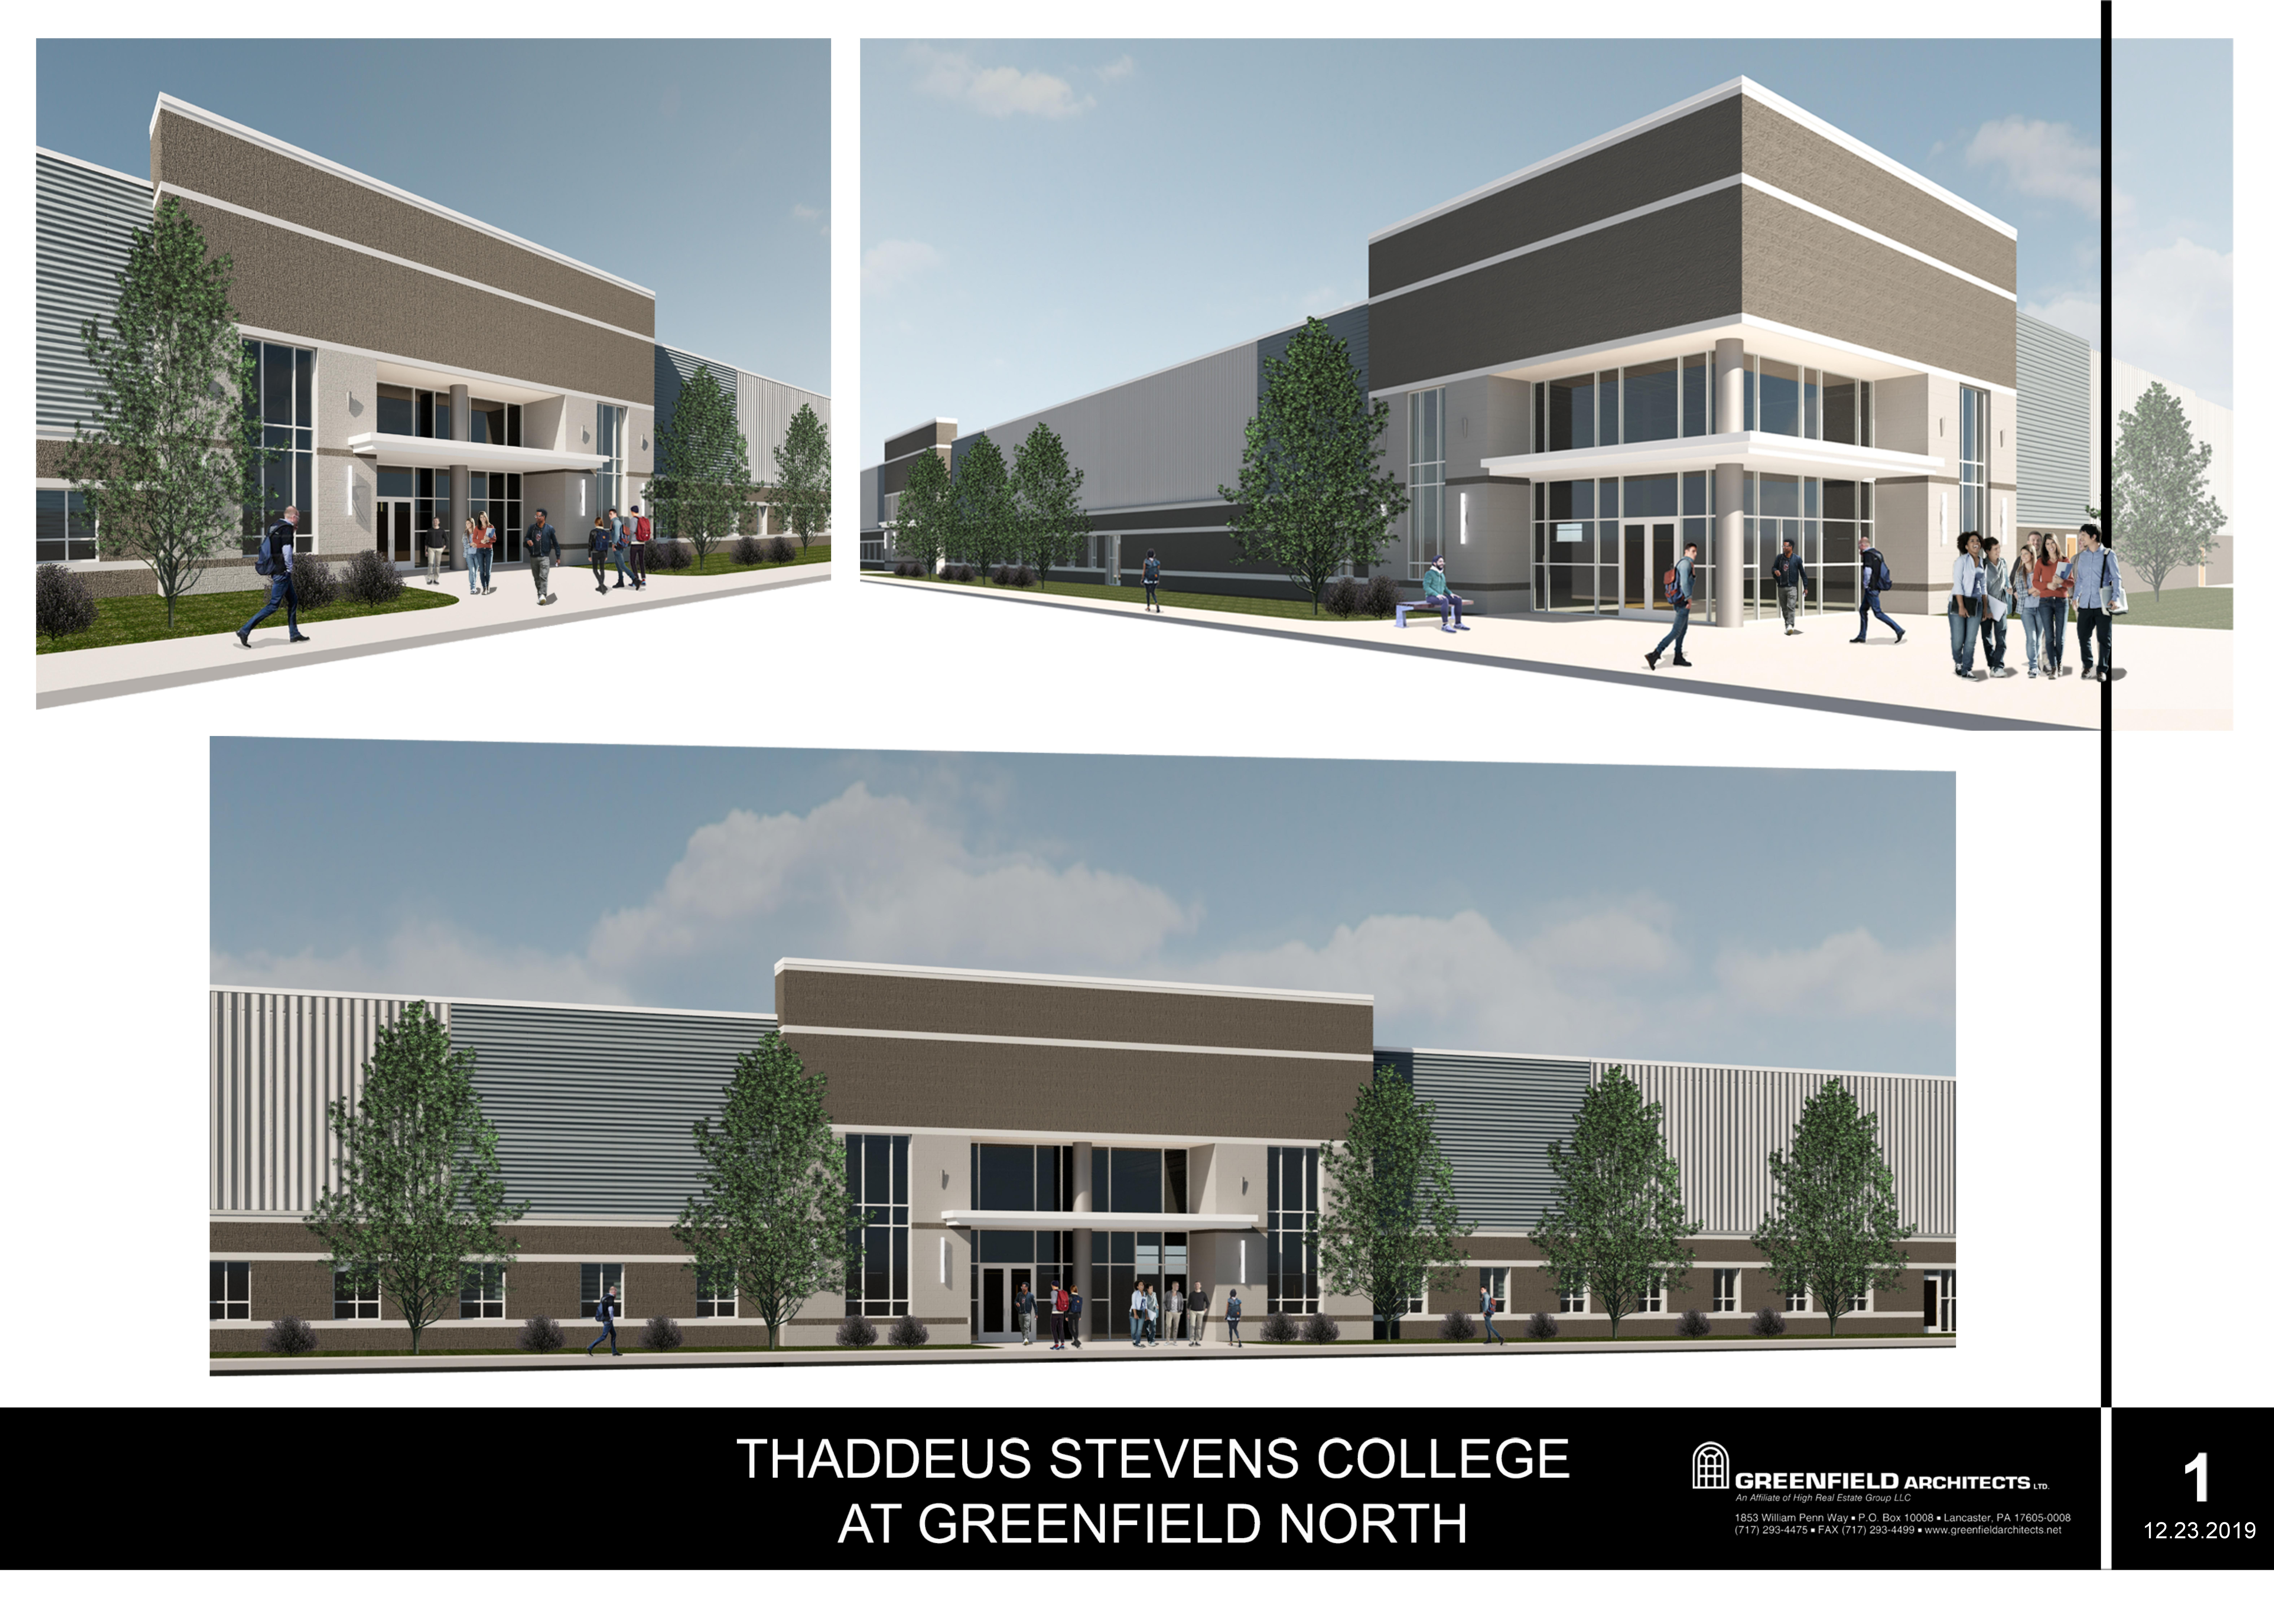 High Concrete Group LLC will fabricate ThinCast rainscreen panels for the new Thaddeus Stevens Transportation Center, an 86,000-square-foot flex facility under construction in Greenfield Corporate Center in Lancaster, Pa. The general contractor is High Construction Company, and the architect is Greenfield Architects Ltd.